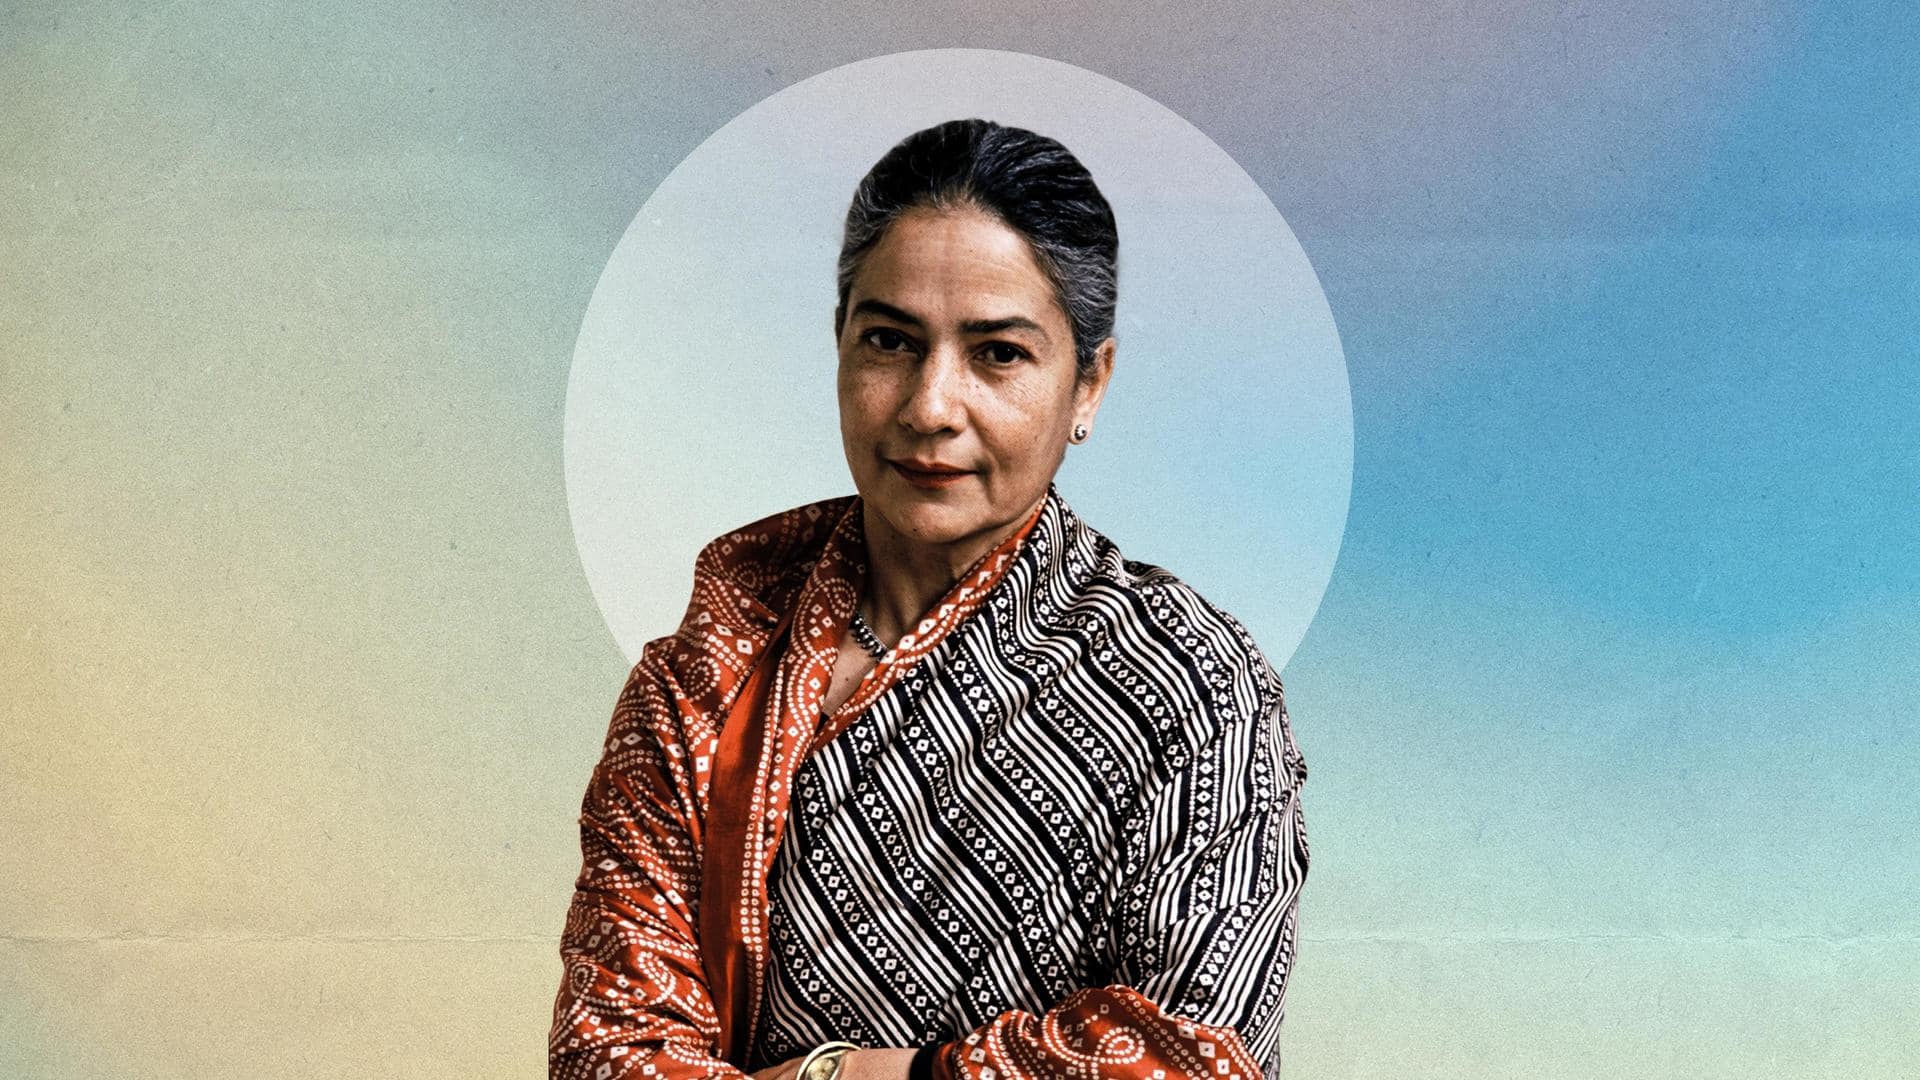 Happy birthday Anita Desai! Check out her most popular works